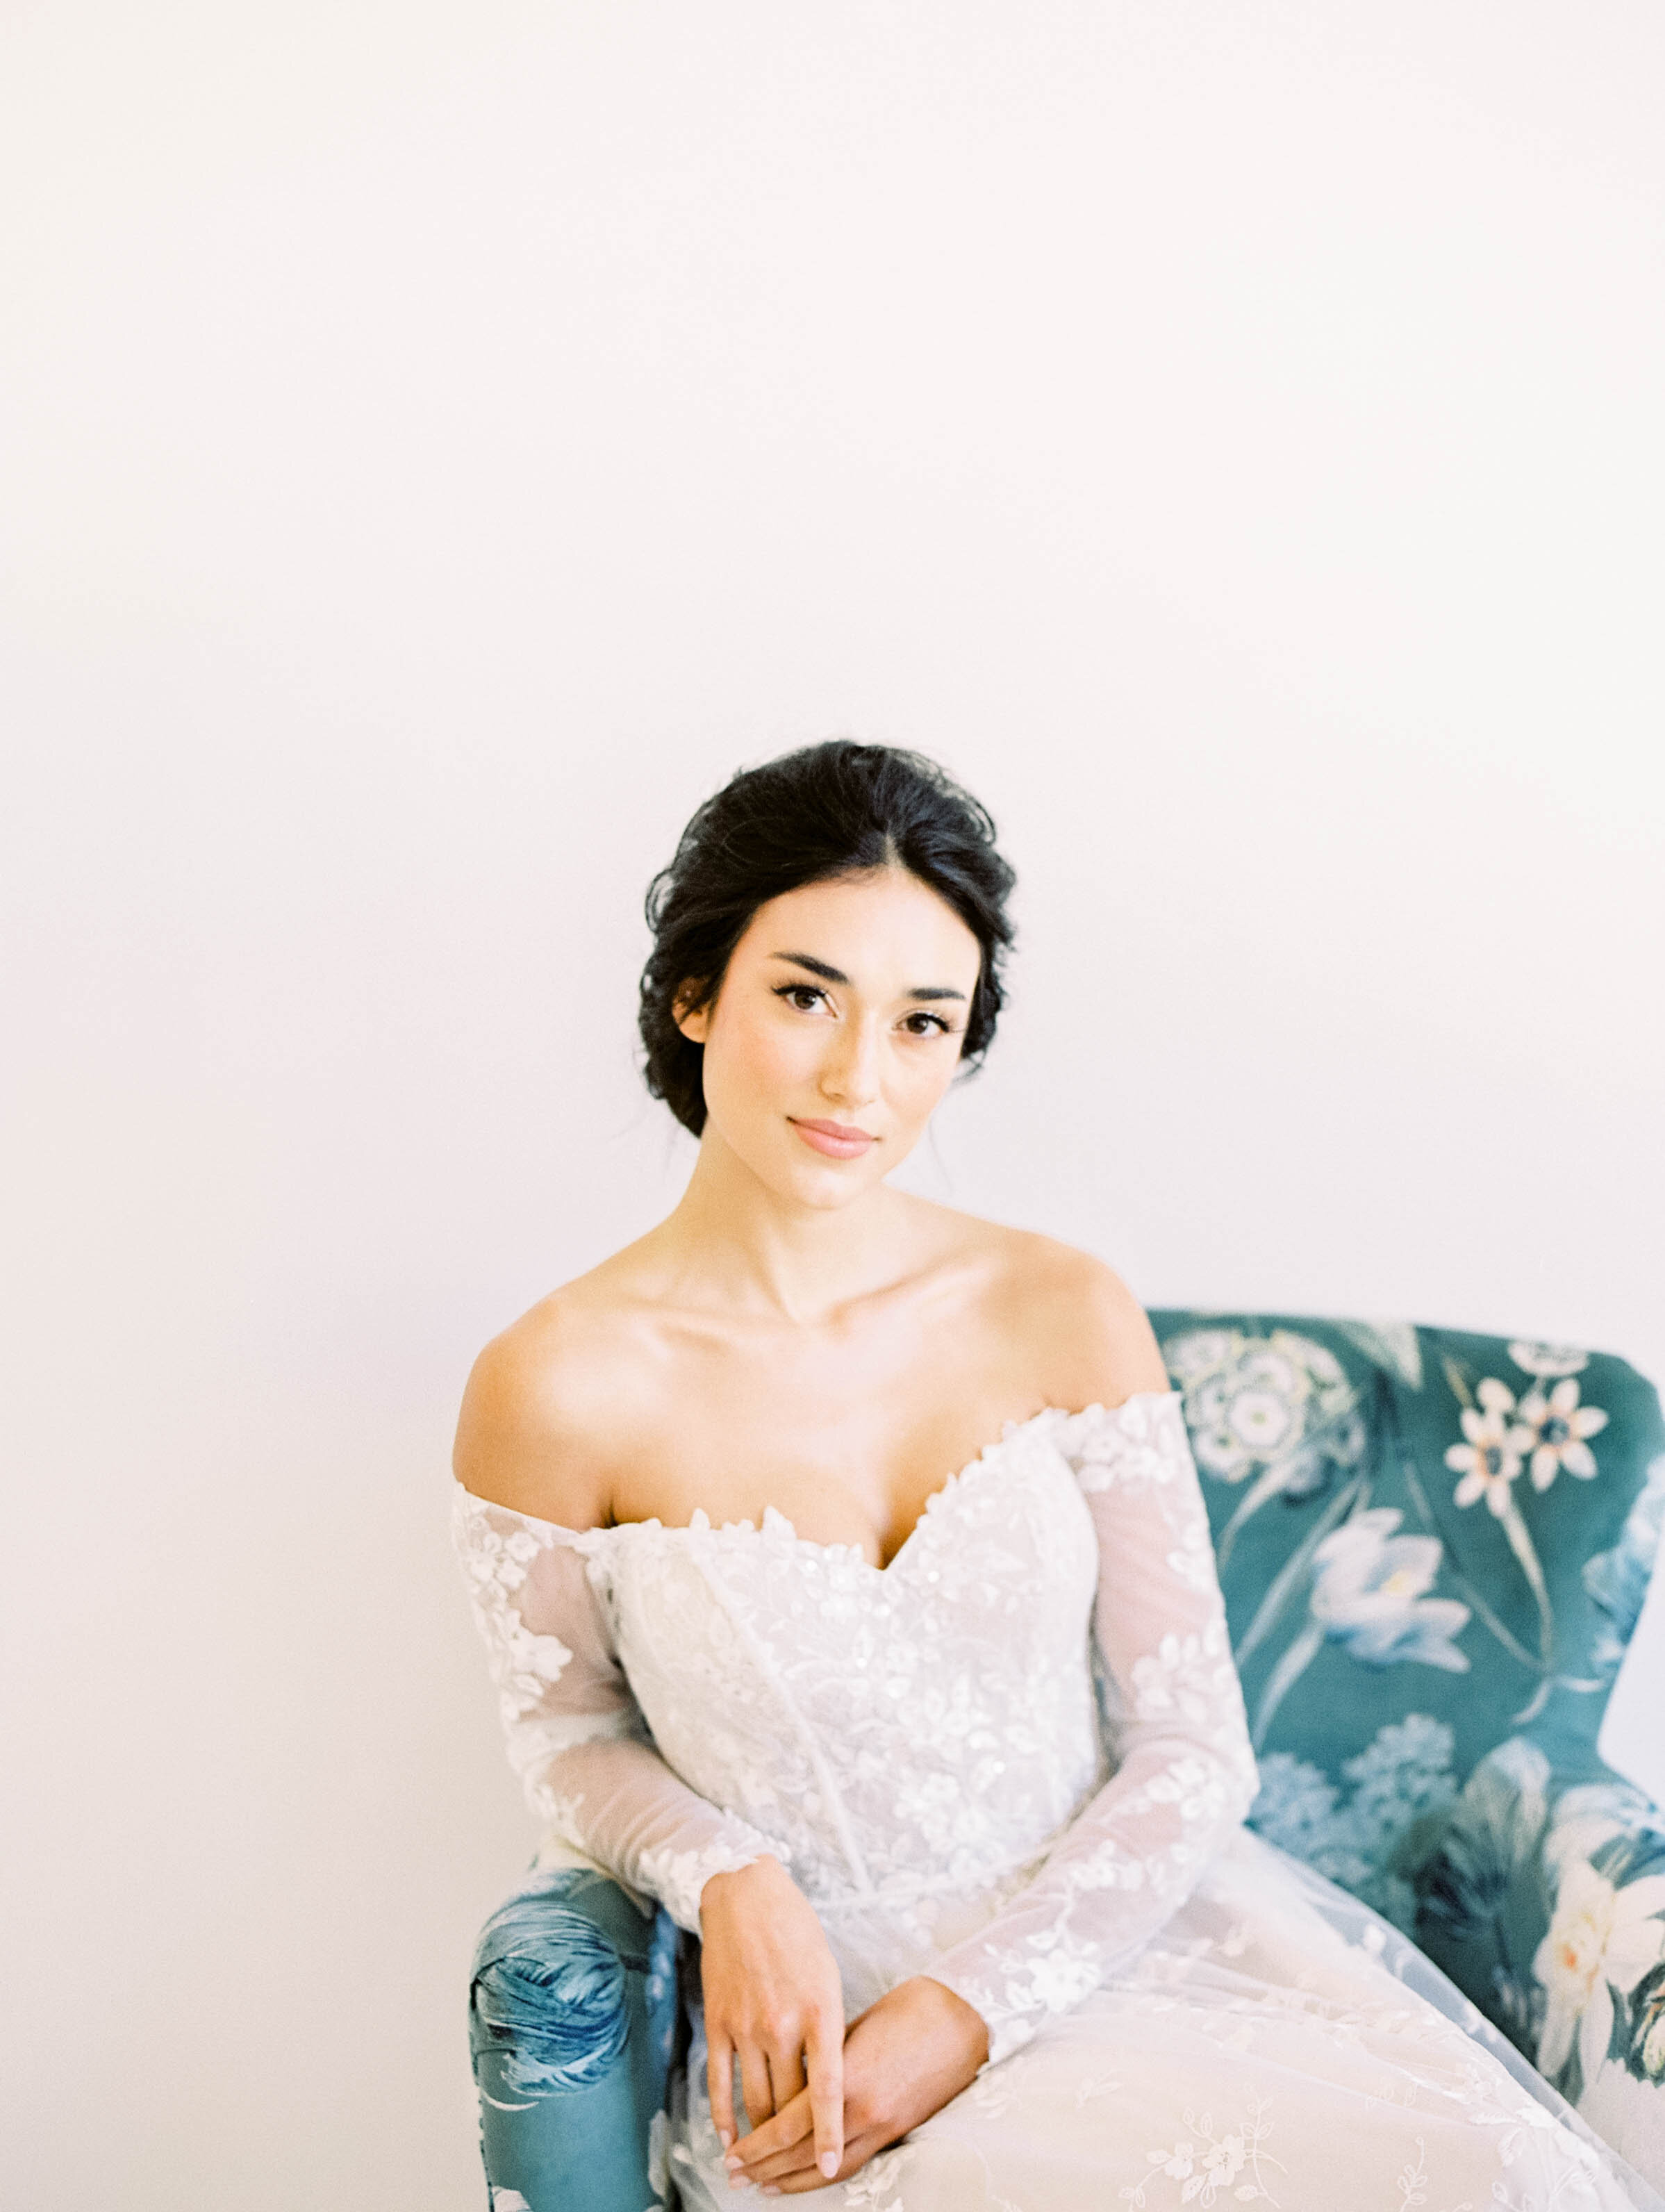 beautiful bride hair and makeup by Birdy Beauty